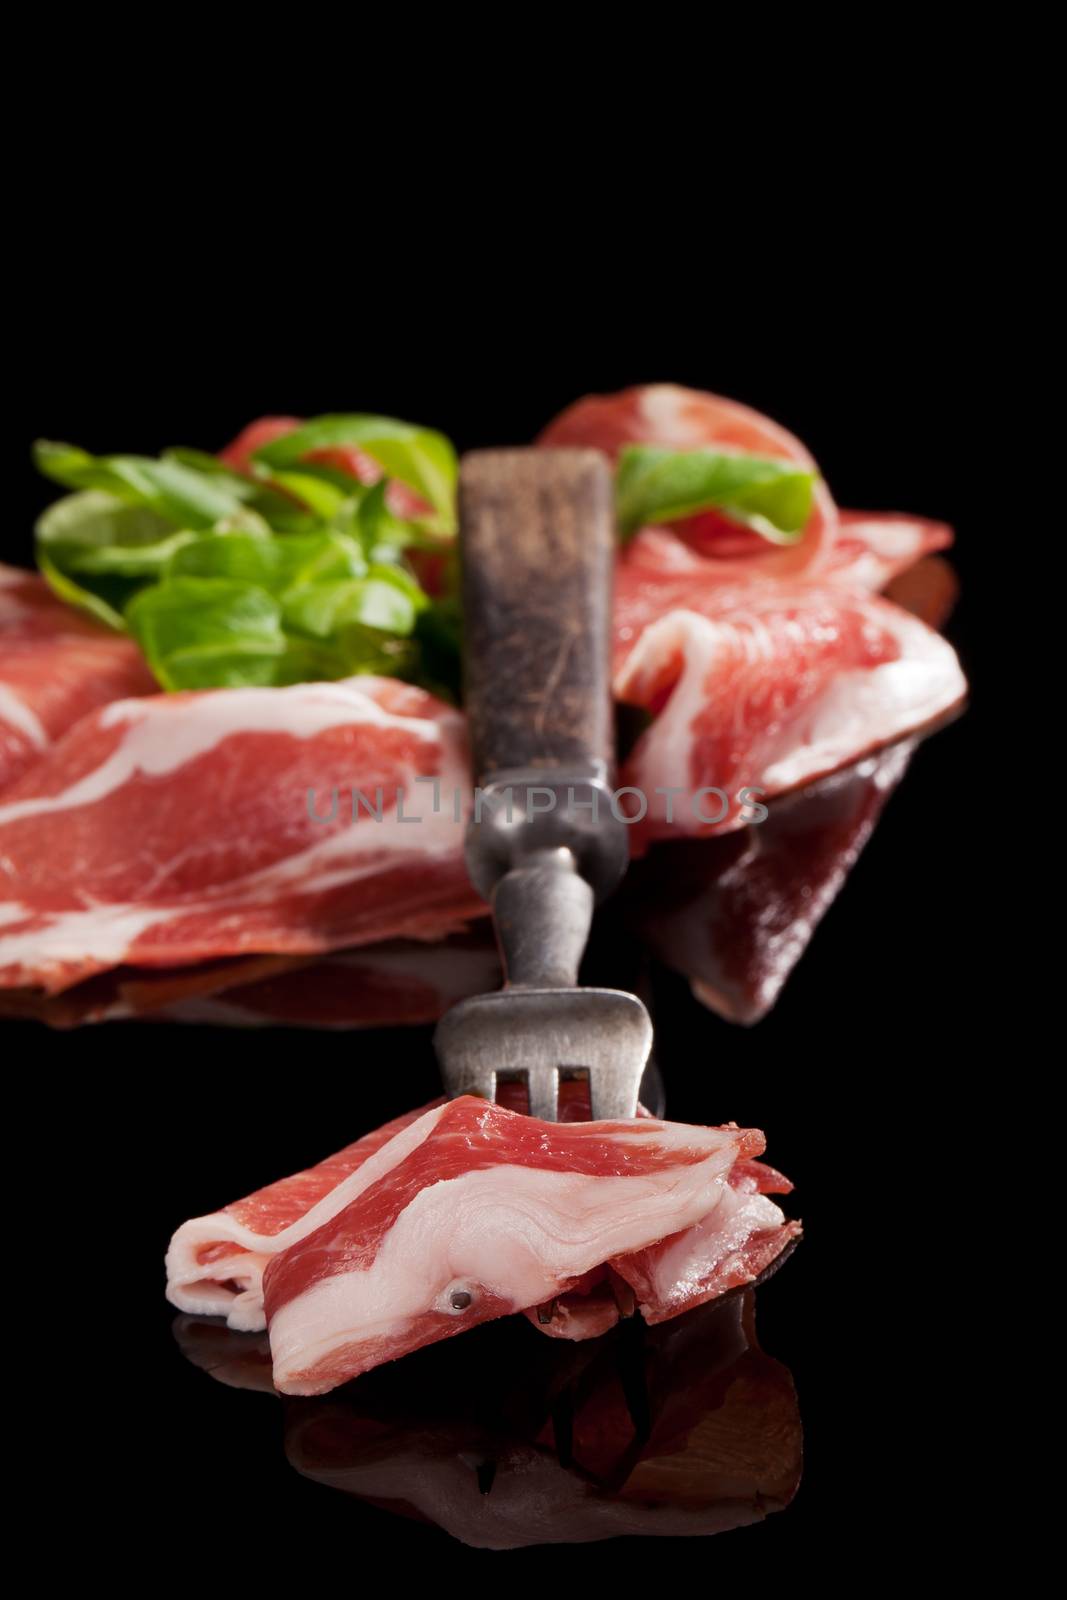 Prosciutto slices with fresh salad and old fork isolated on black. Rustic style country ham background.